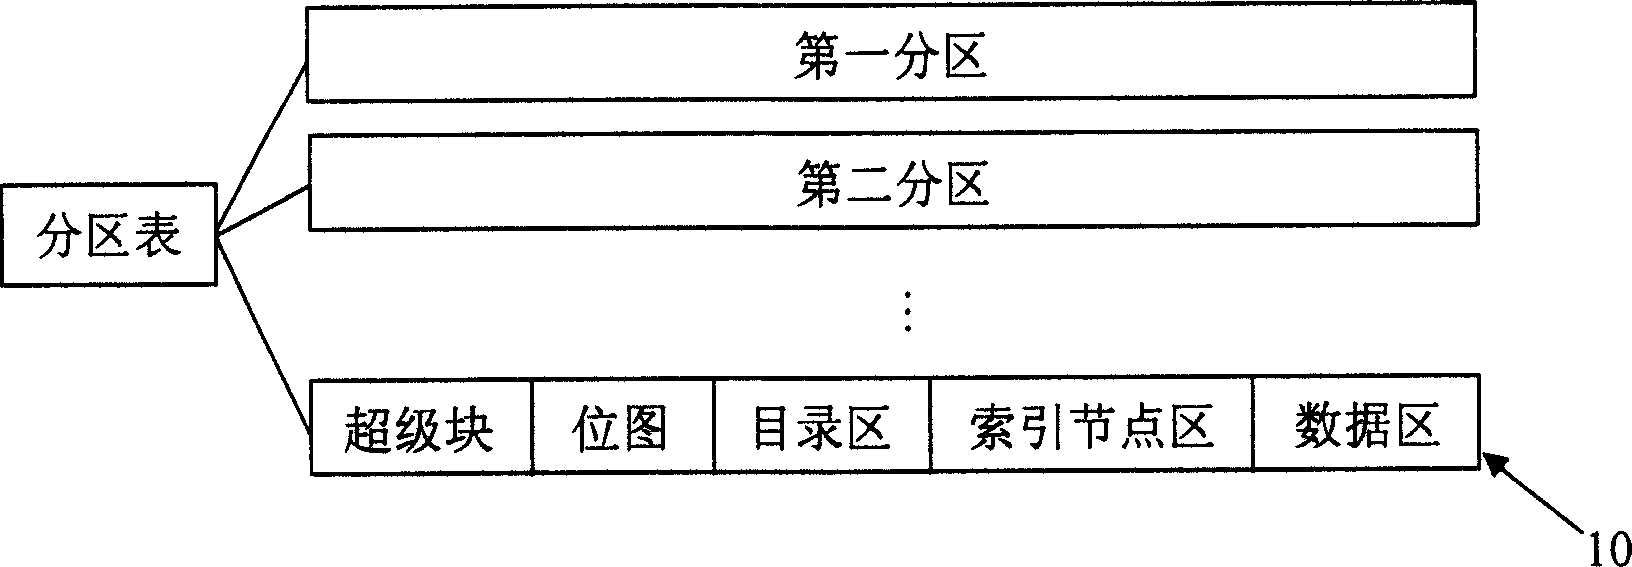 File system in device of recording and playing back sounds and images under embedded type environment